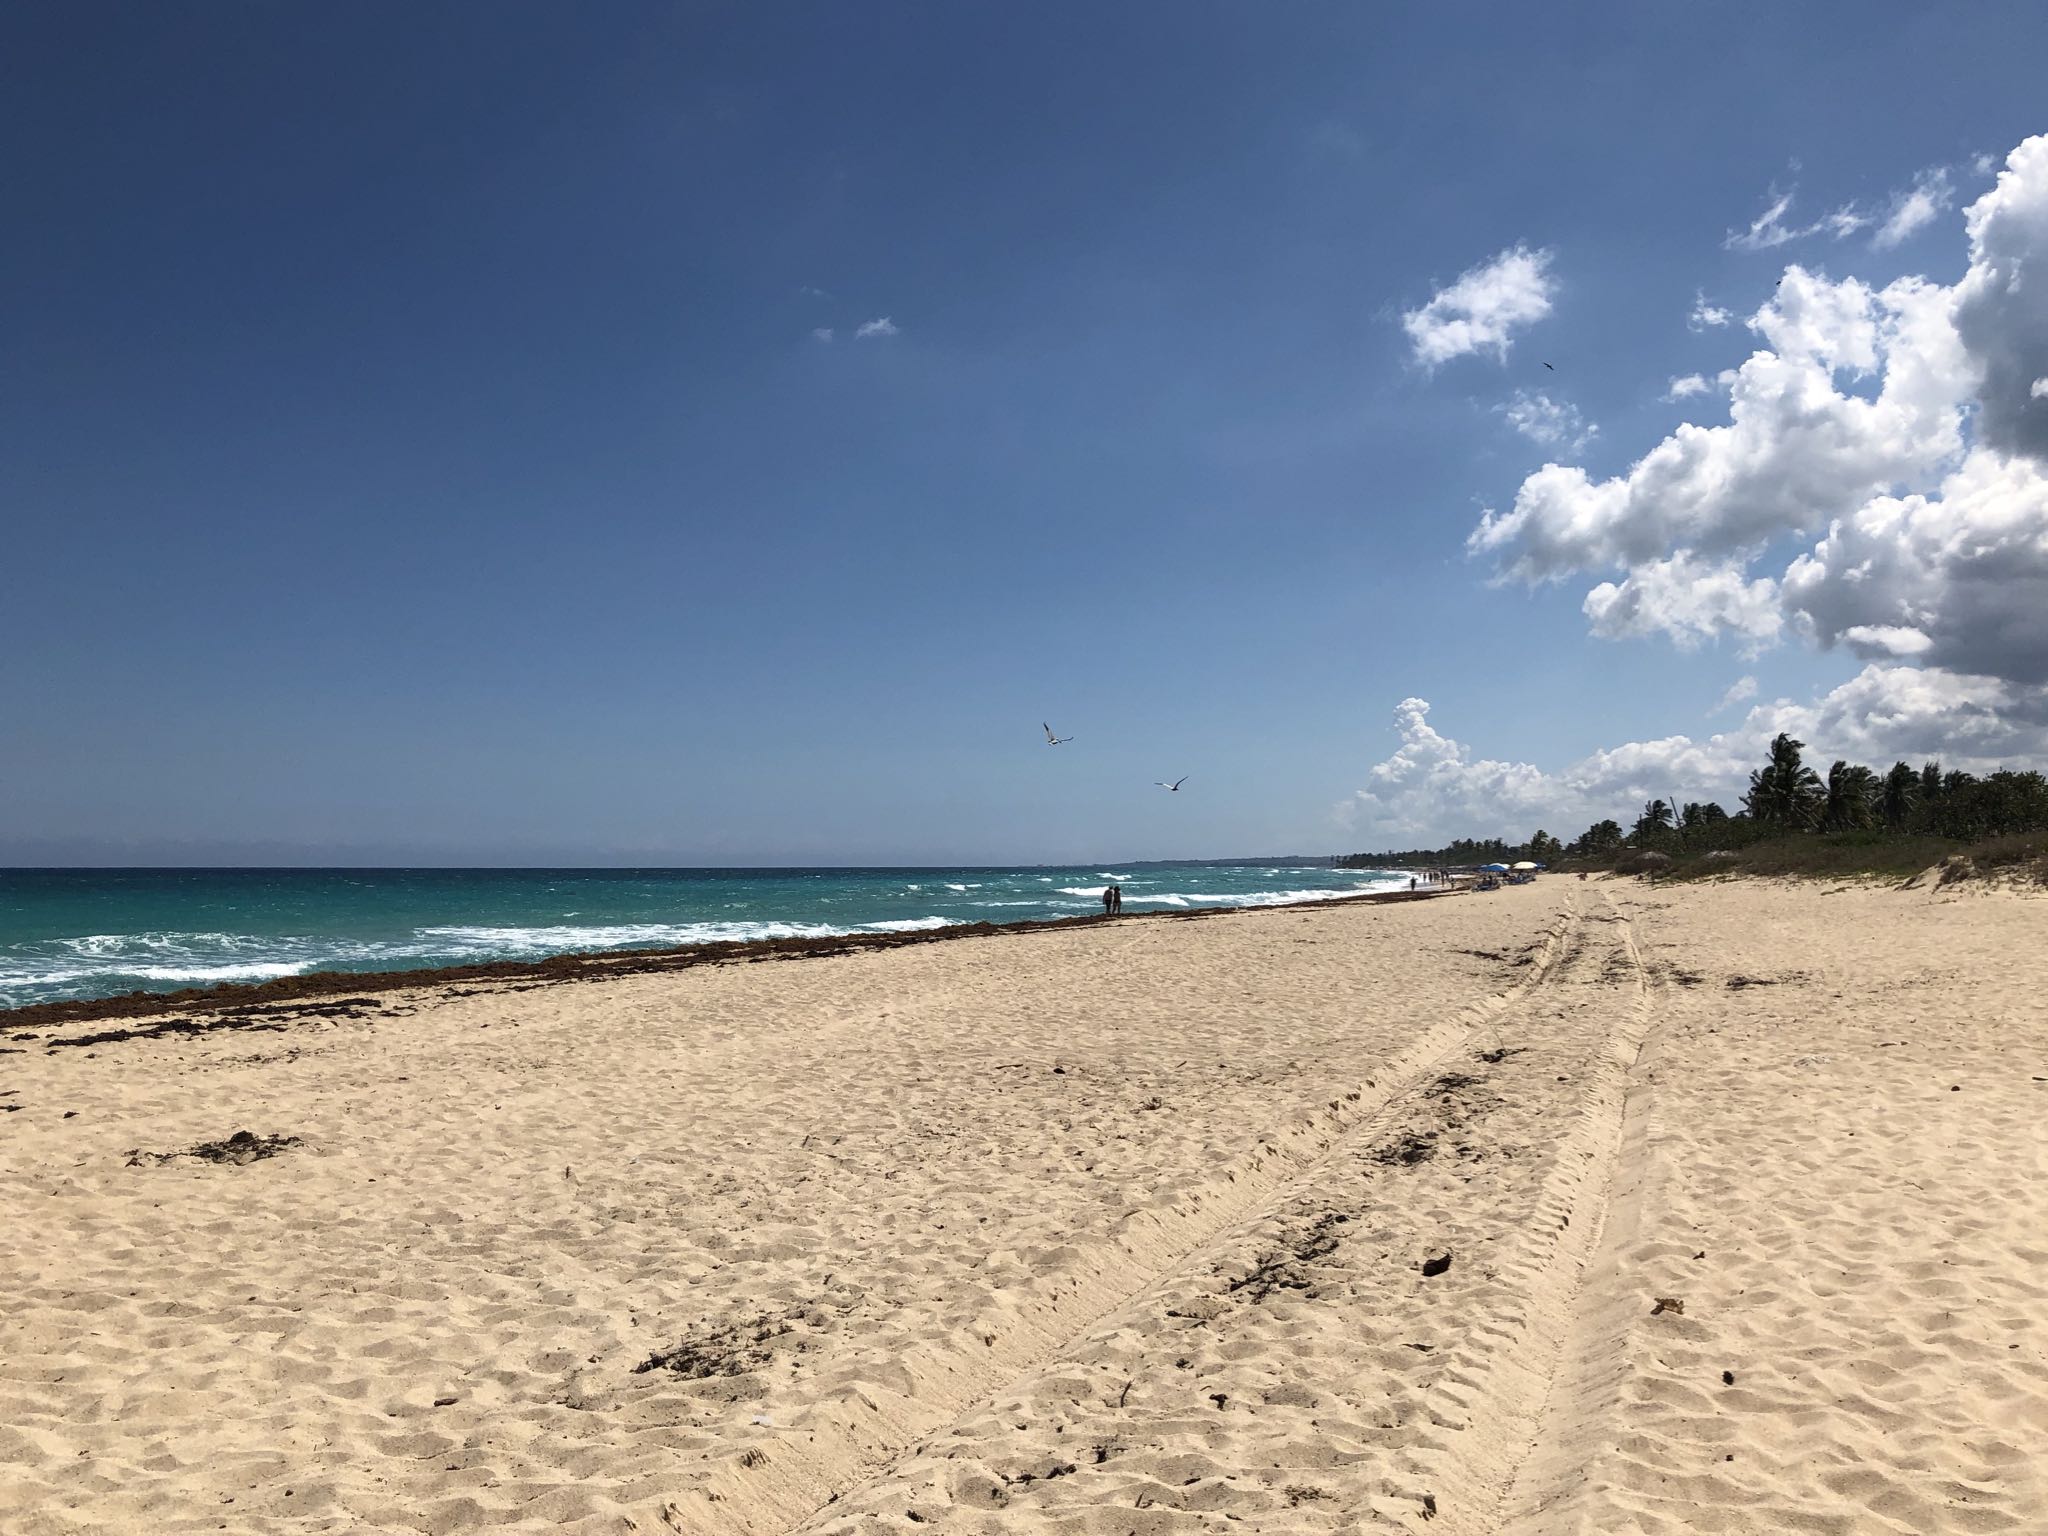 Photo 136 of 221 from the album Highlights Cuba 2019.